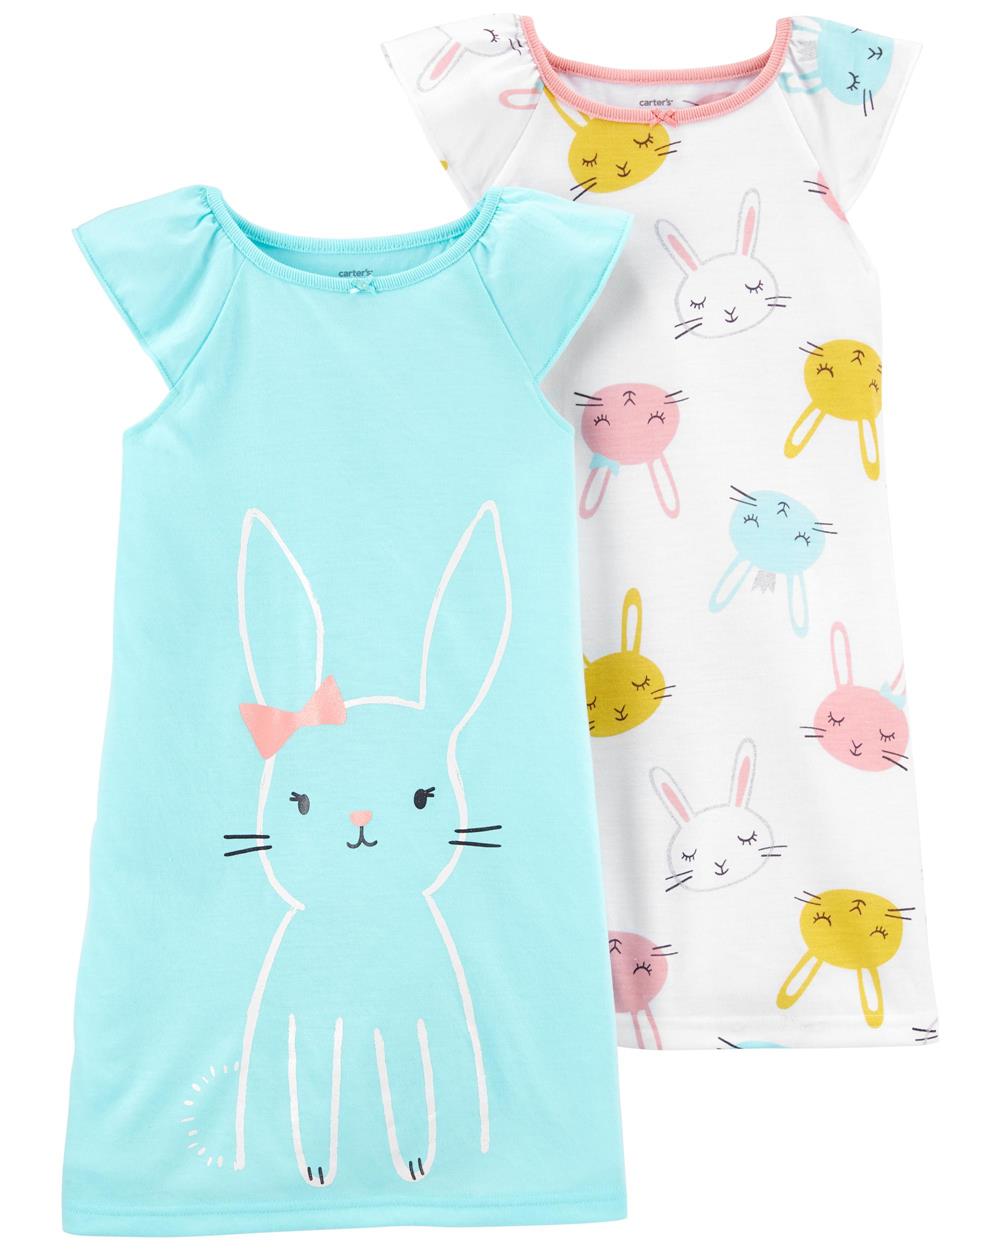 Carters Girls 2T-4T 2-Pack Bunny Nightgowns